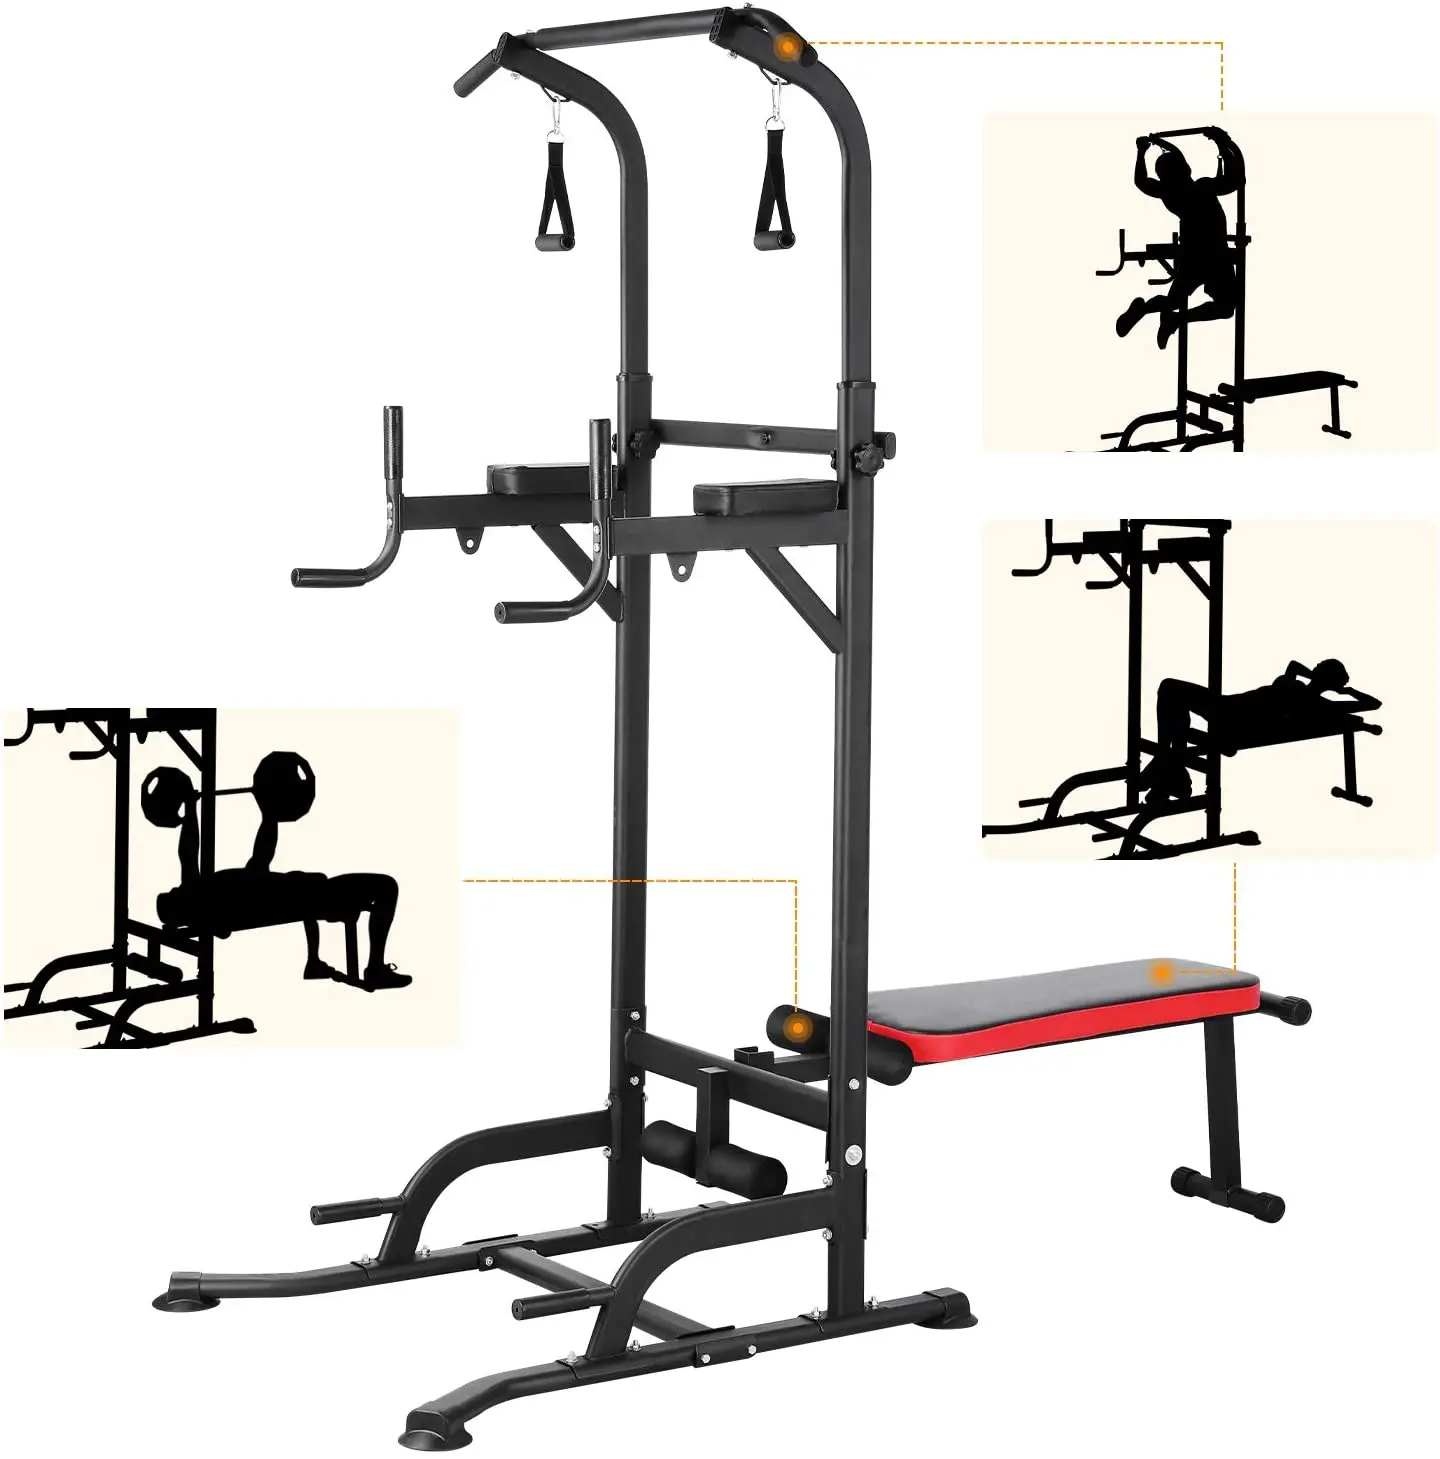 Portable Pull Dip Station Gym Bar Power Tower | Gym Equipment Dip Station Power - Aliexpress